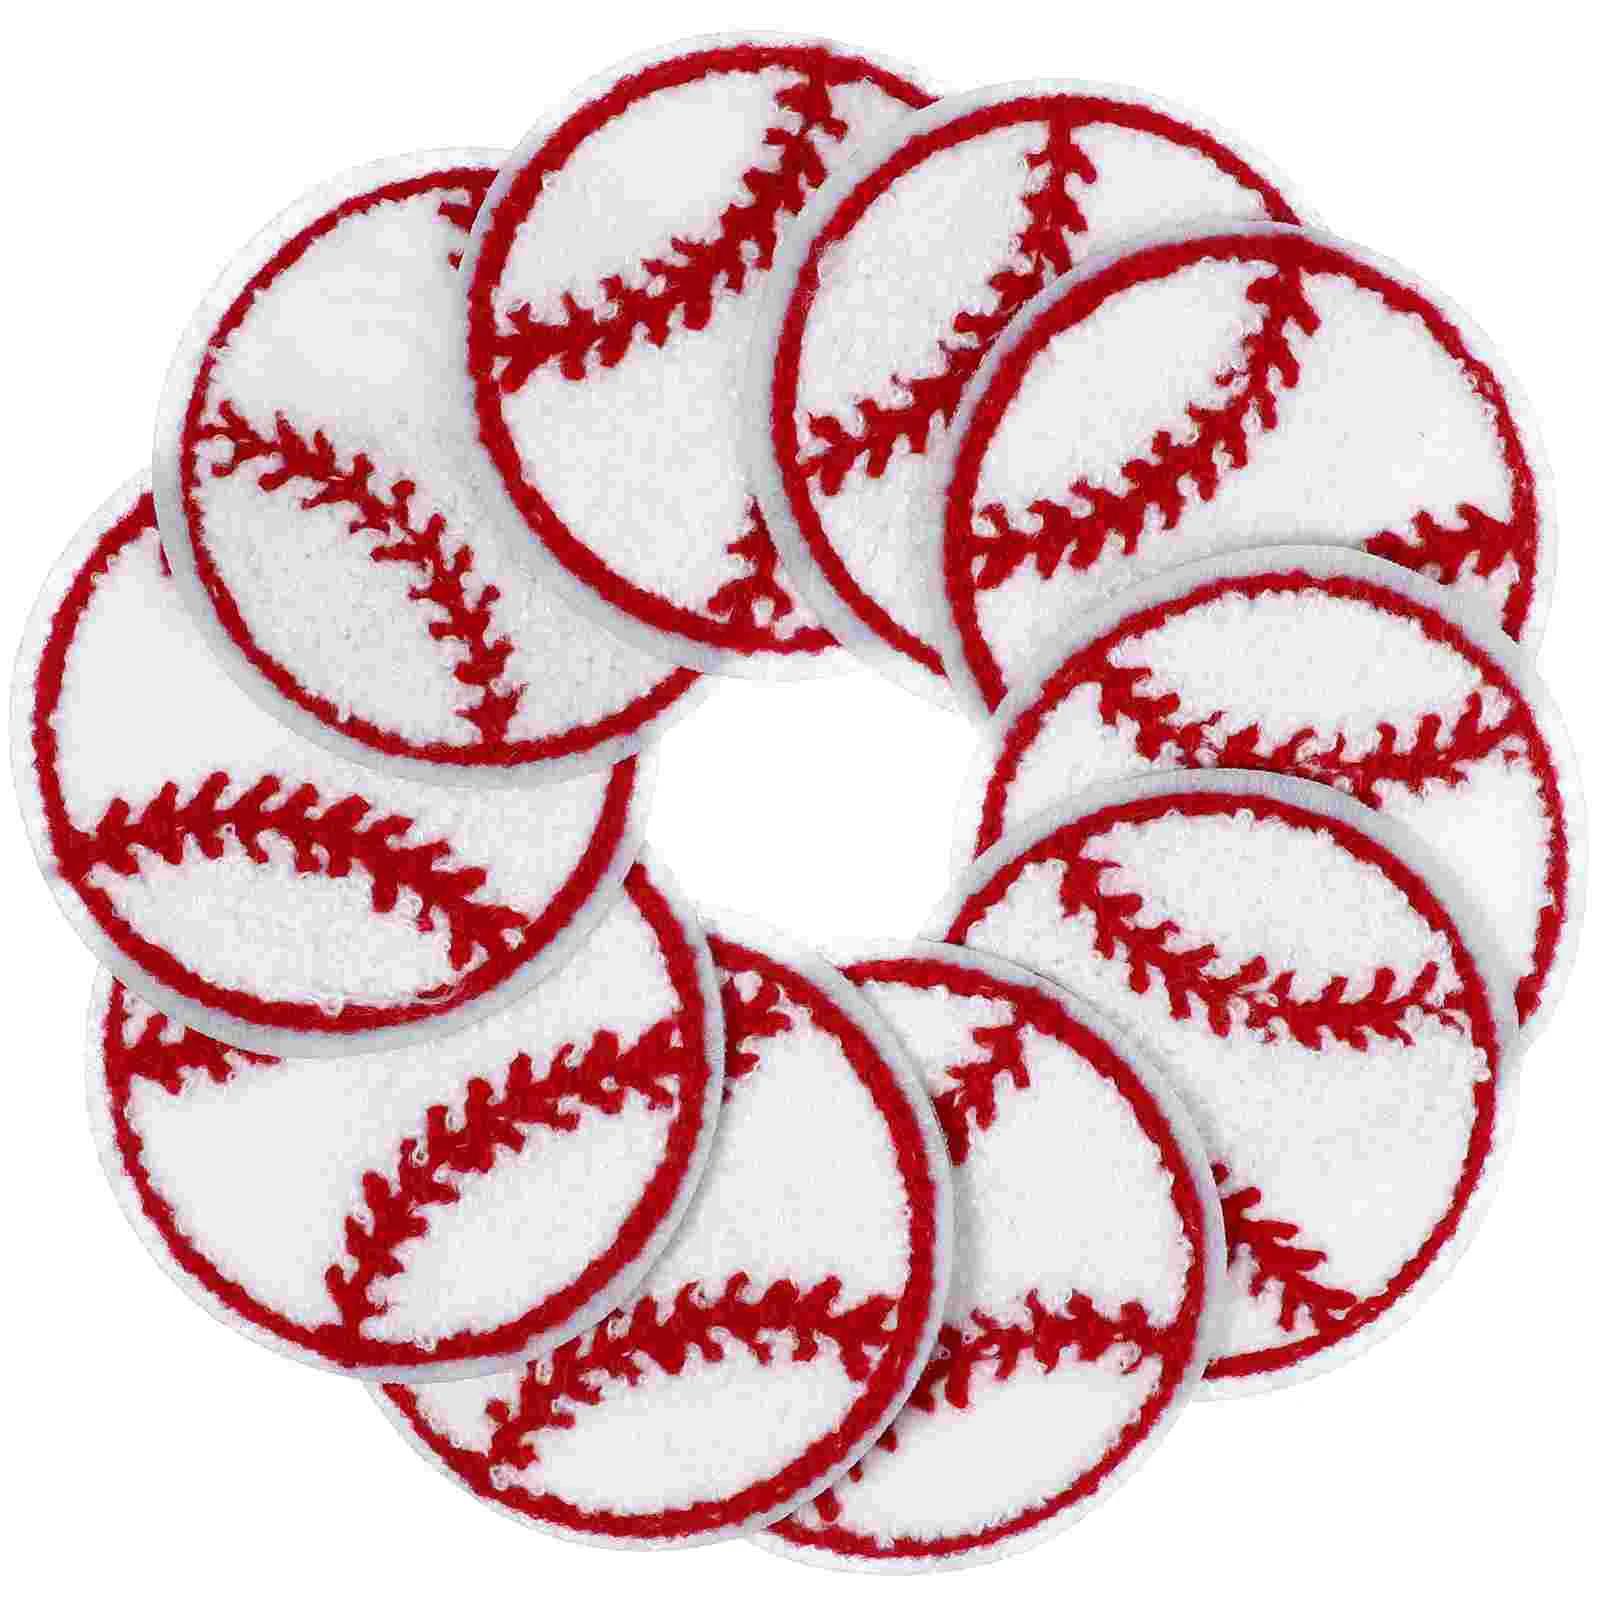 

10 Pcs Baseball Patch Clothes Accessories Household Patches Flowers Decor Delicate Coat Replaceable Decorative Towel Embroidery